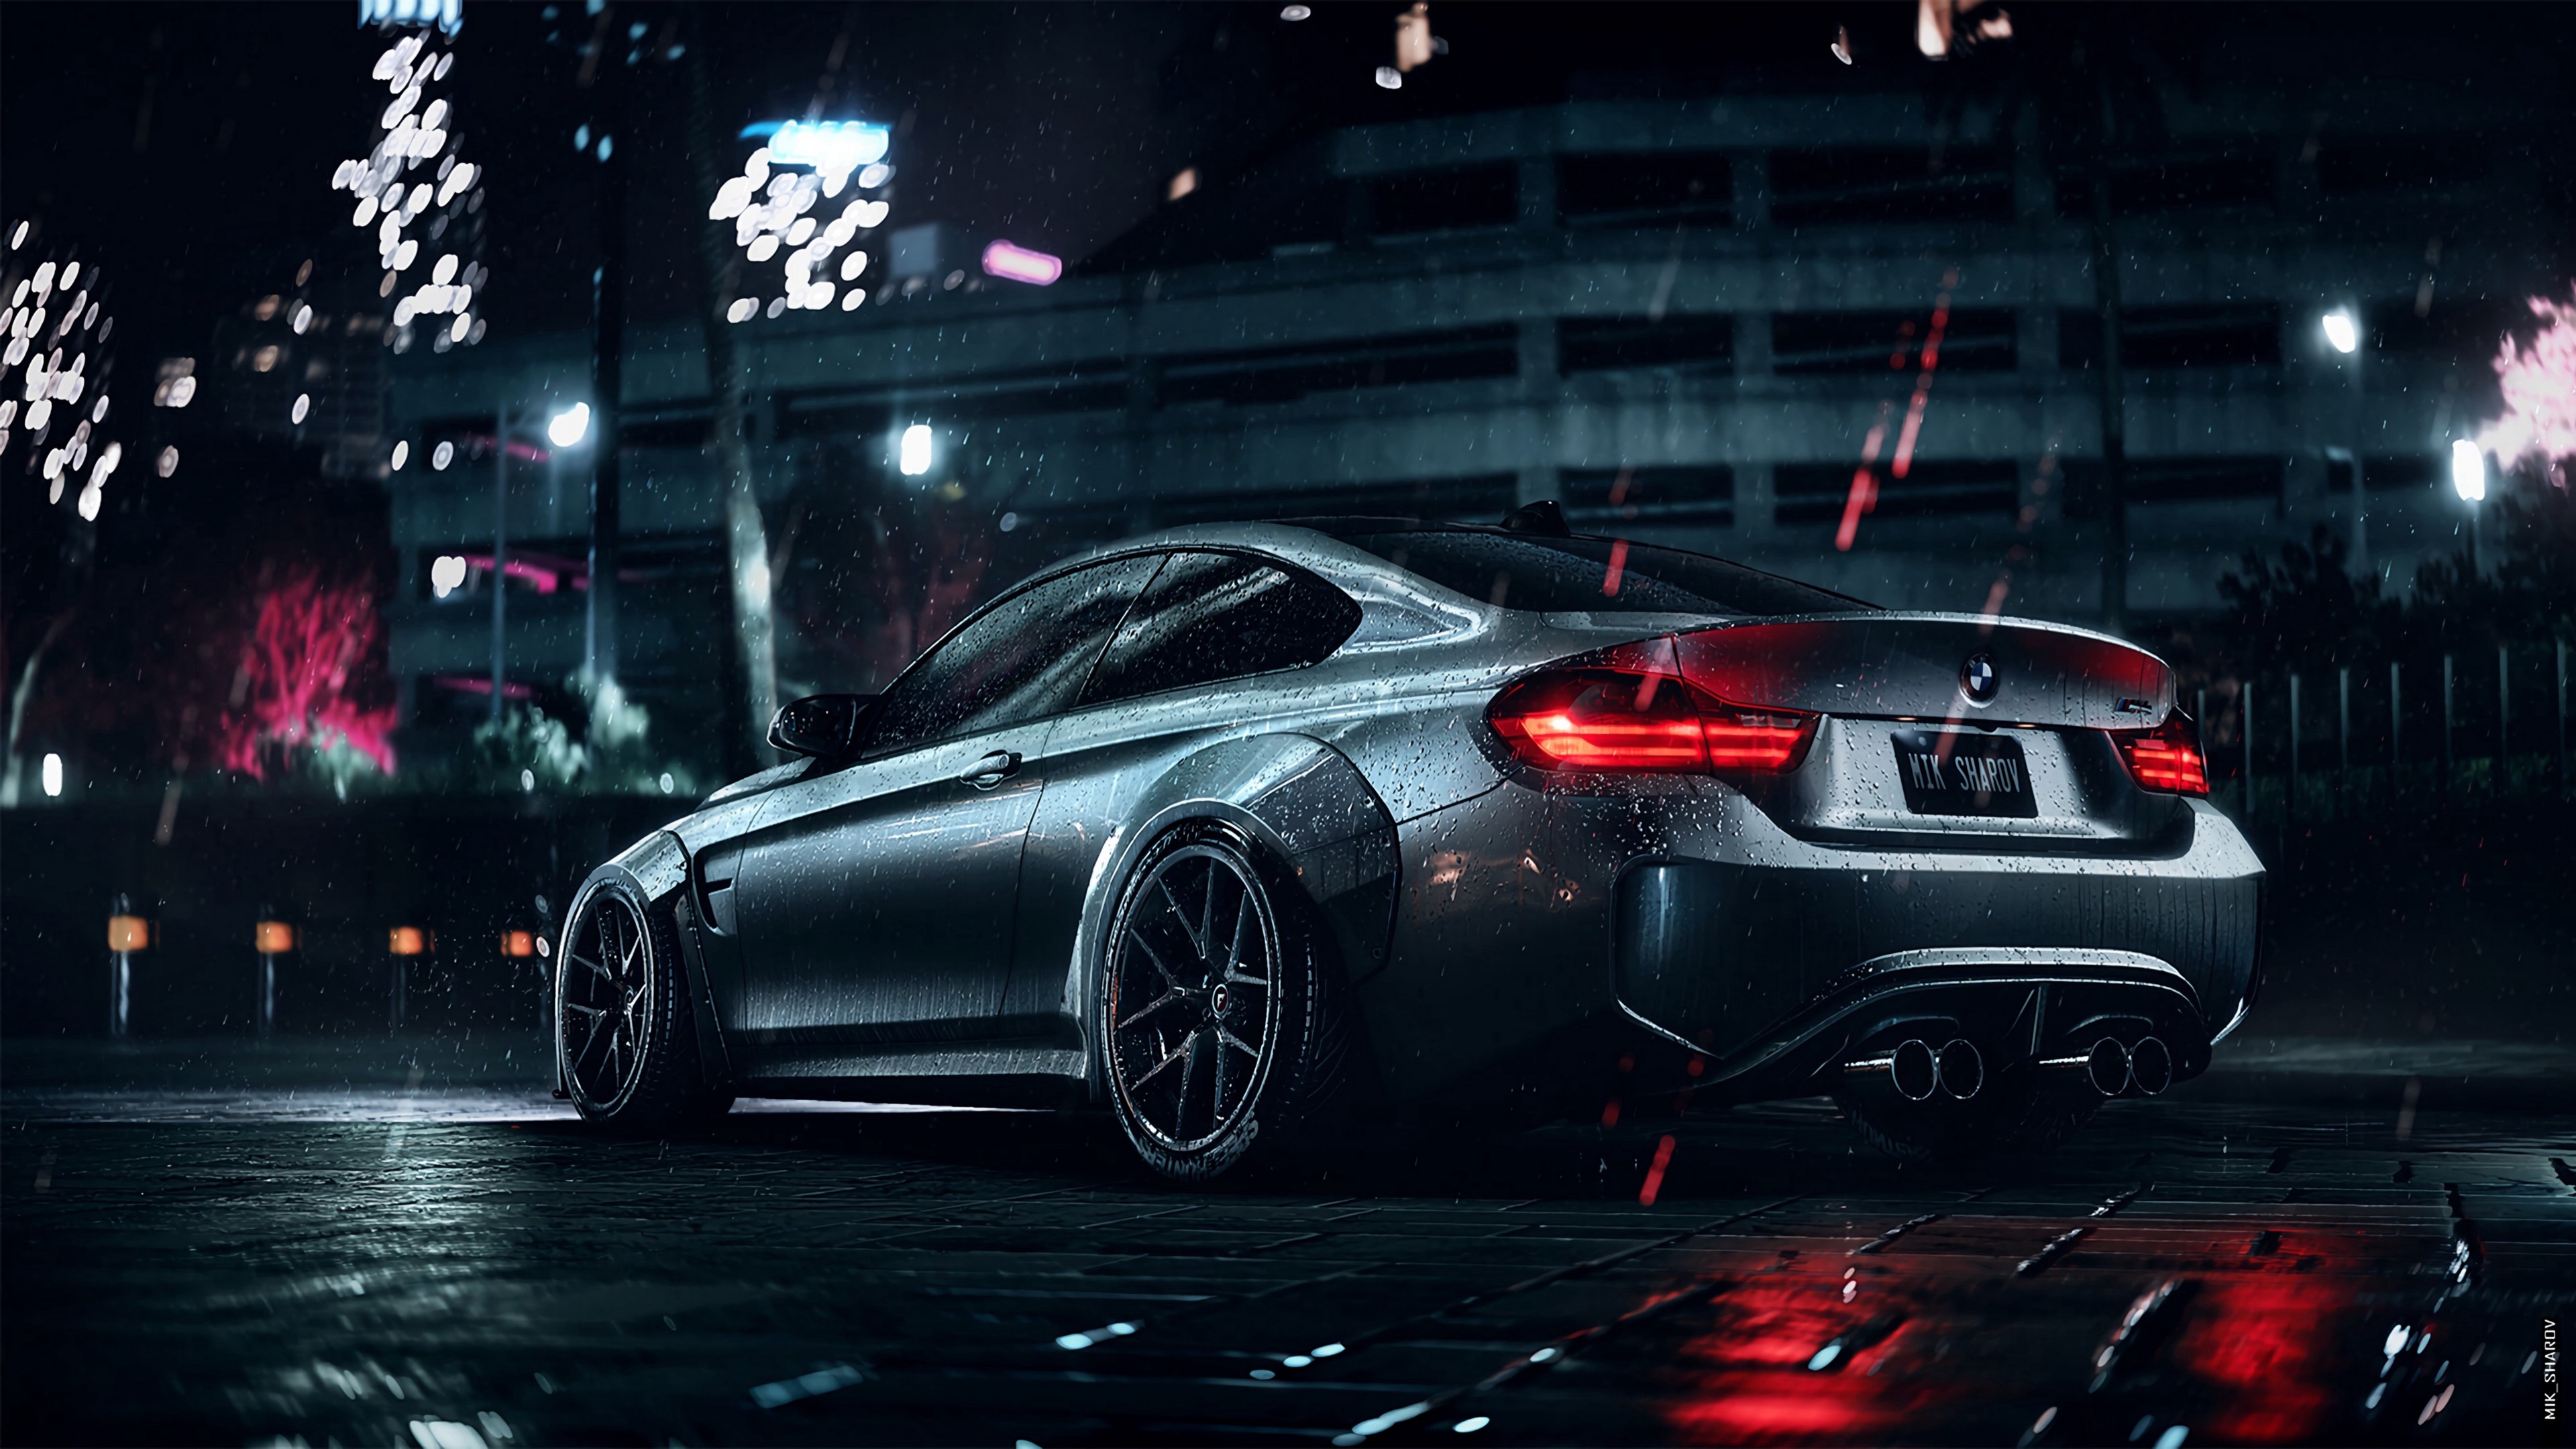 Top 999+ Bmw Wallpaper Full HD, 4K✓Free to Use